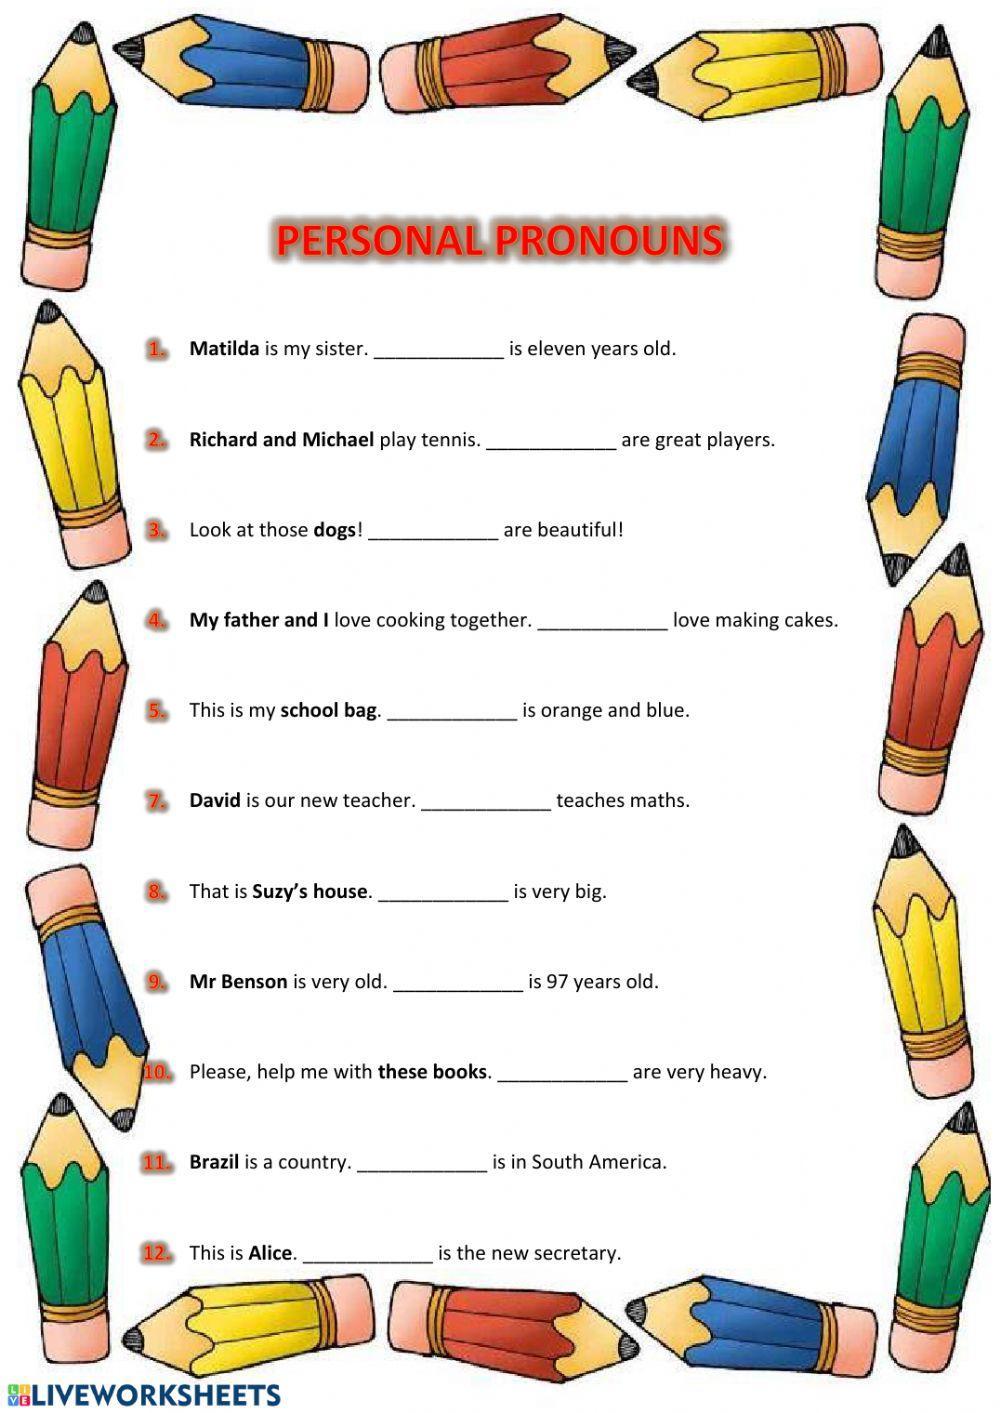 Verb TO BE and Personal Pronouns